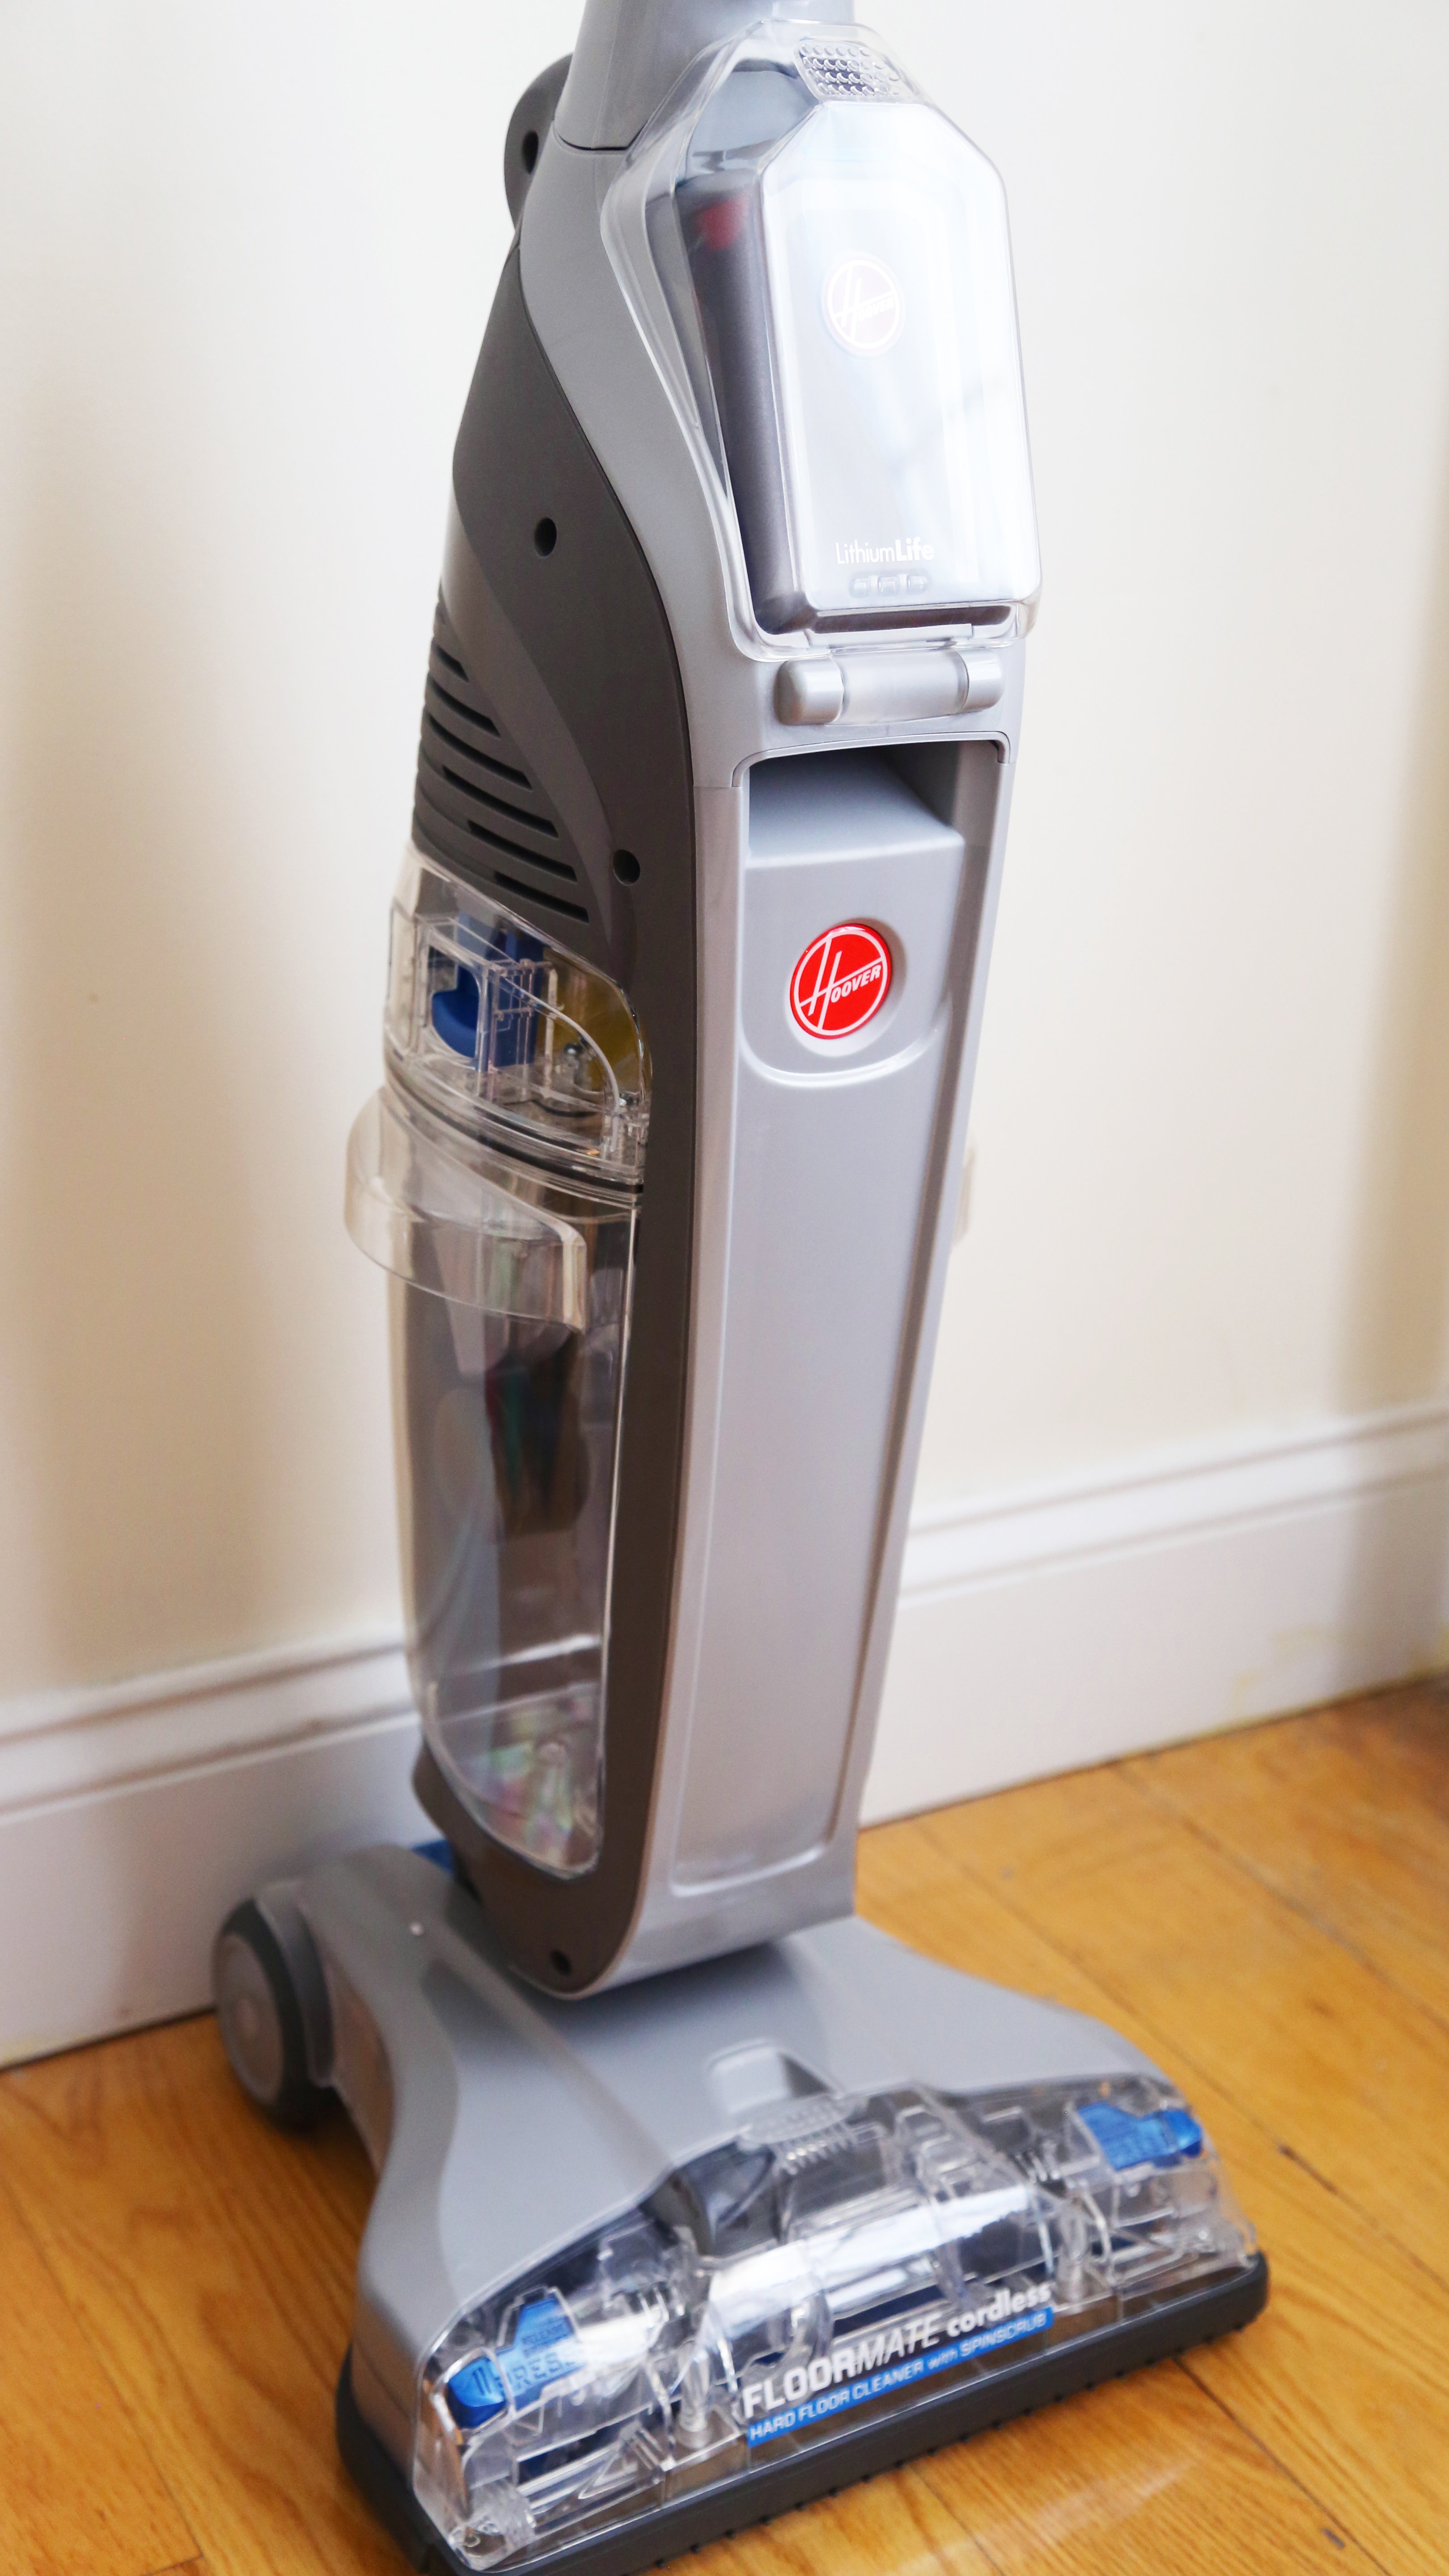 The Hoover FloorMate Will Make Your Kitchen Floors Shine | The Kitchn